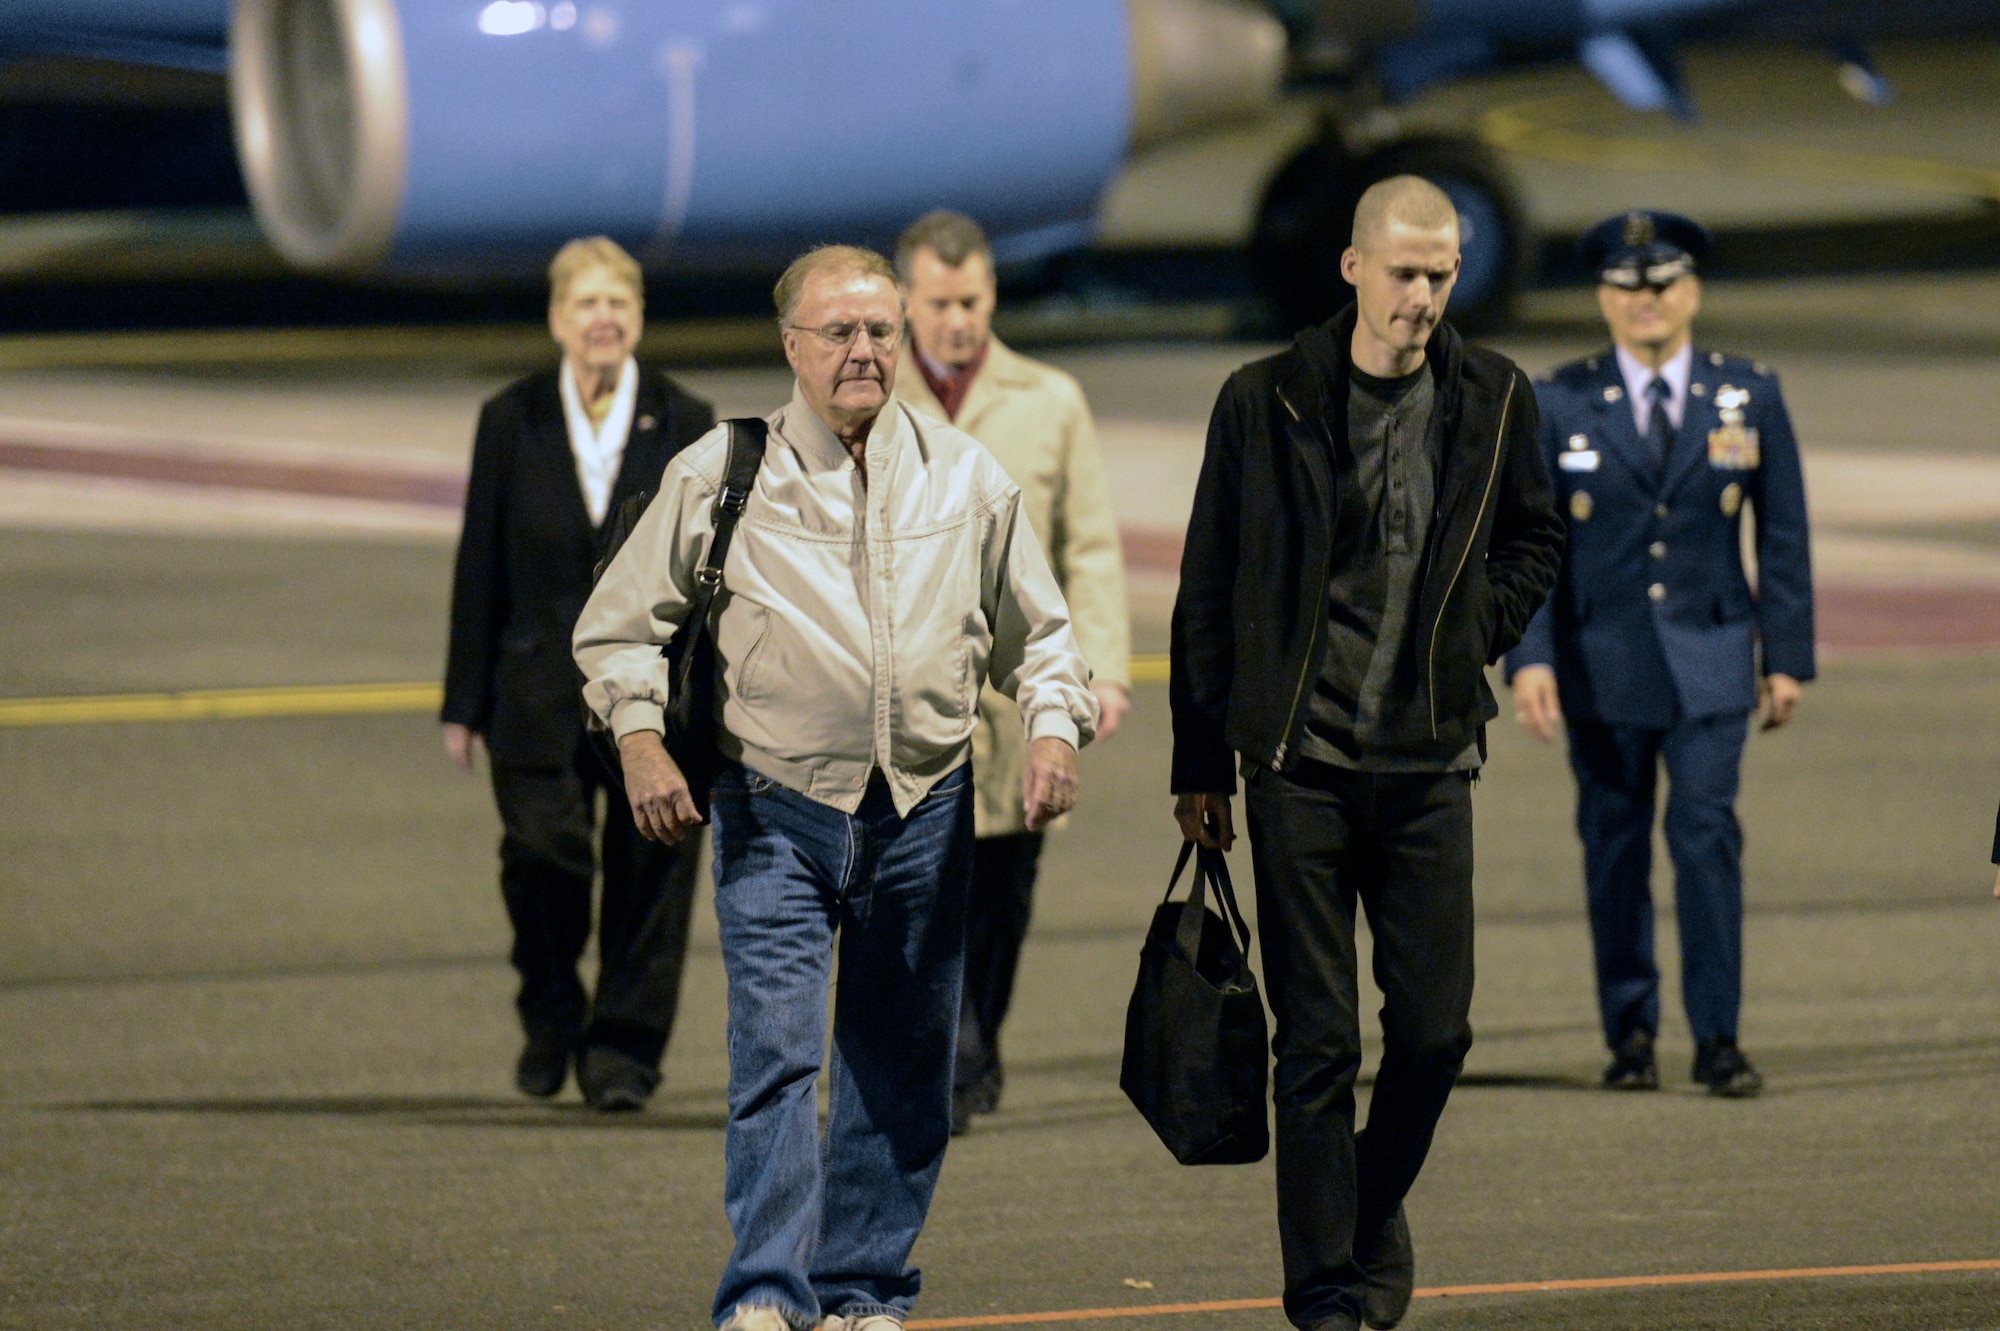 Mathew Miller (right), one of the last two American citizens imprisoned in North Korea, walks into the McChord Field Passenger Terminal Nov. 8th, 2014, at Joint Base Lewis-McChord, Wash., after spending more than seven months in a North Korean prison. Miller was sentenced to six years hard labor for espionage after allegedly ripping up his passport and seeking asylum upon his entry into North Korea. (U.S. Air Force photo/Staff Sgt. Russ Jackson)